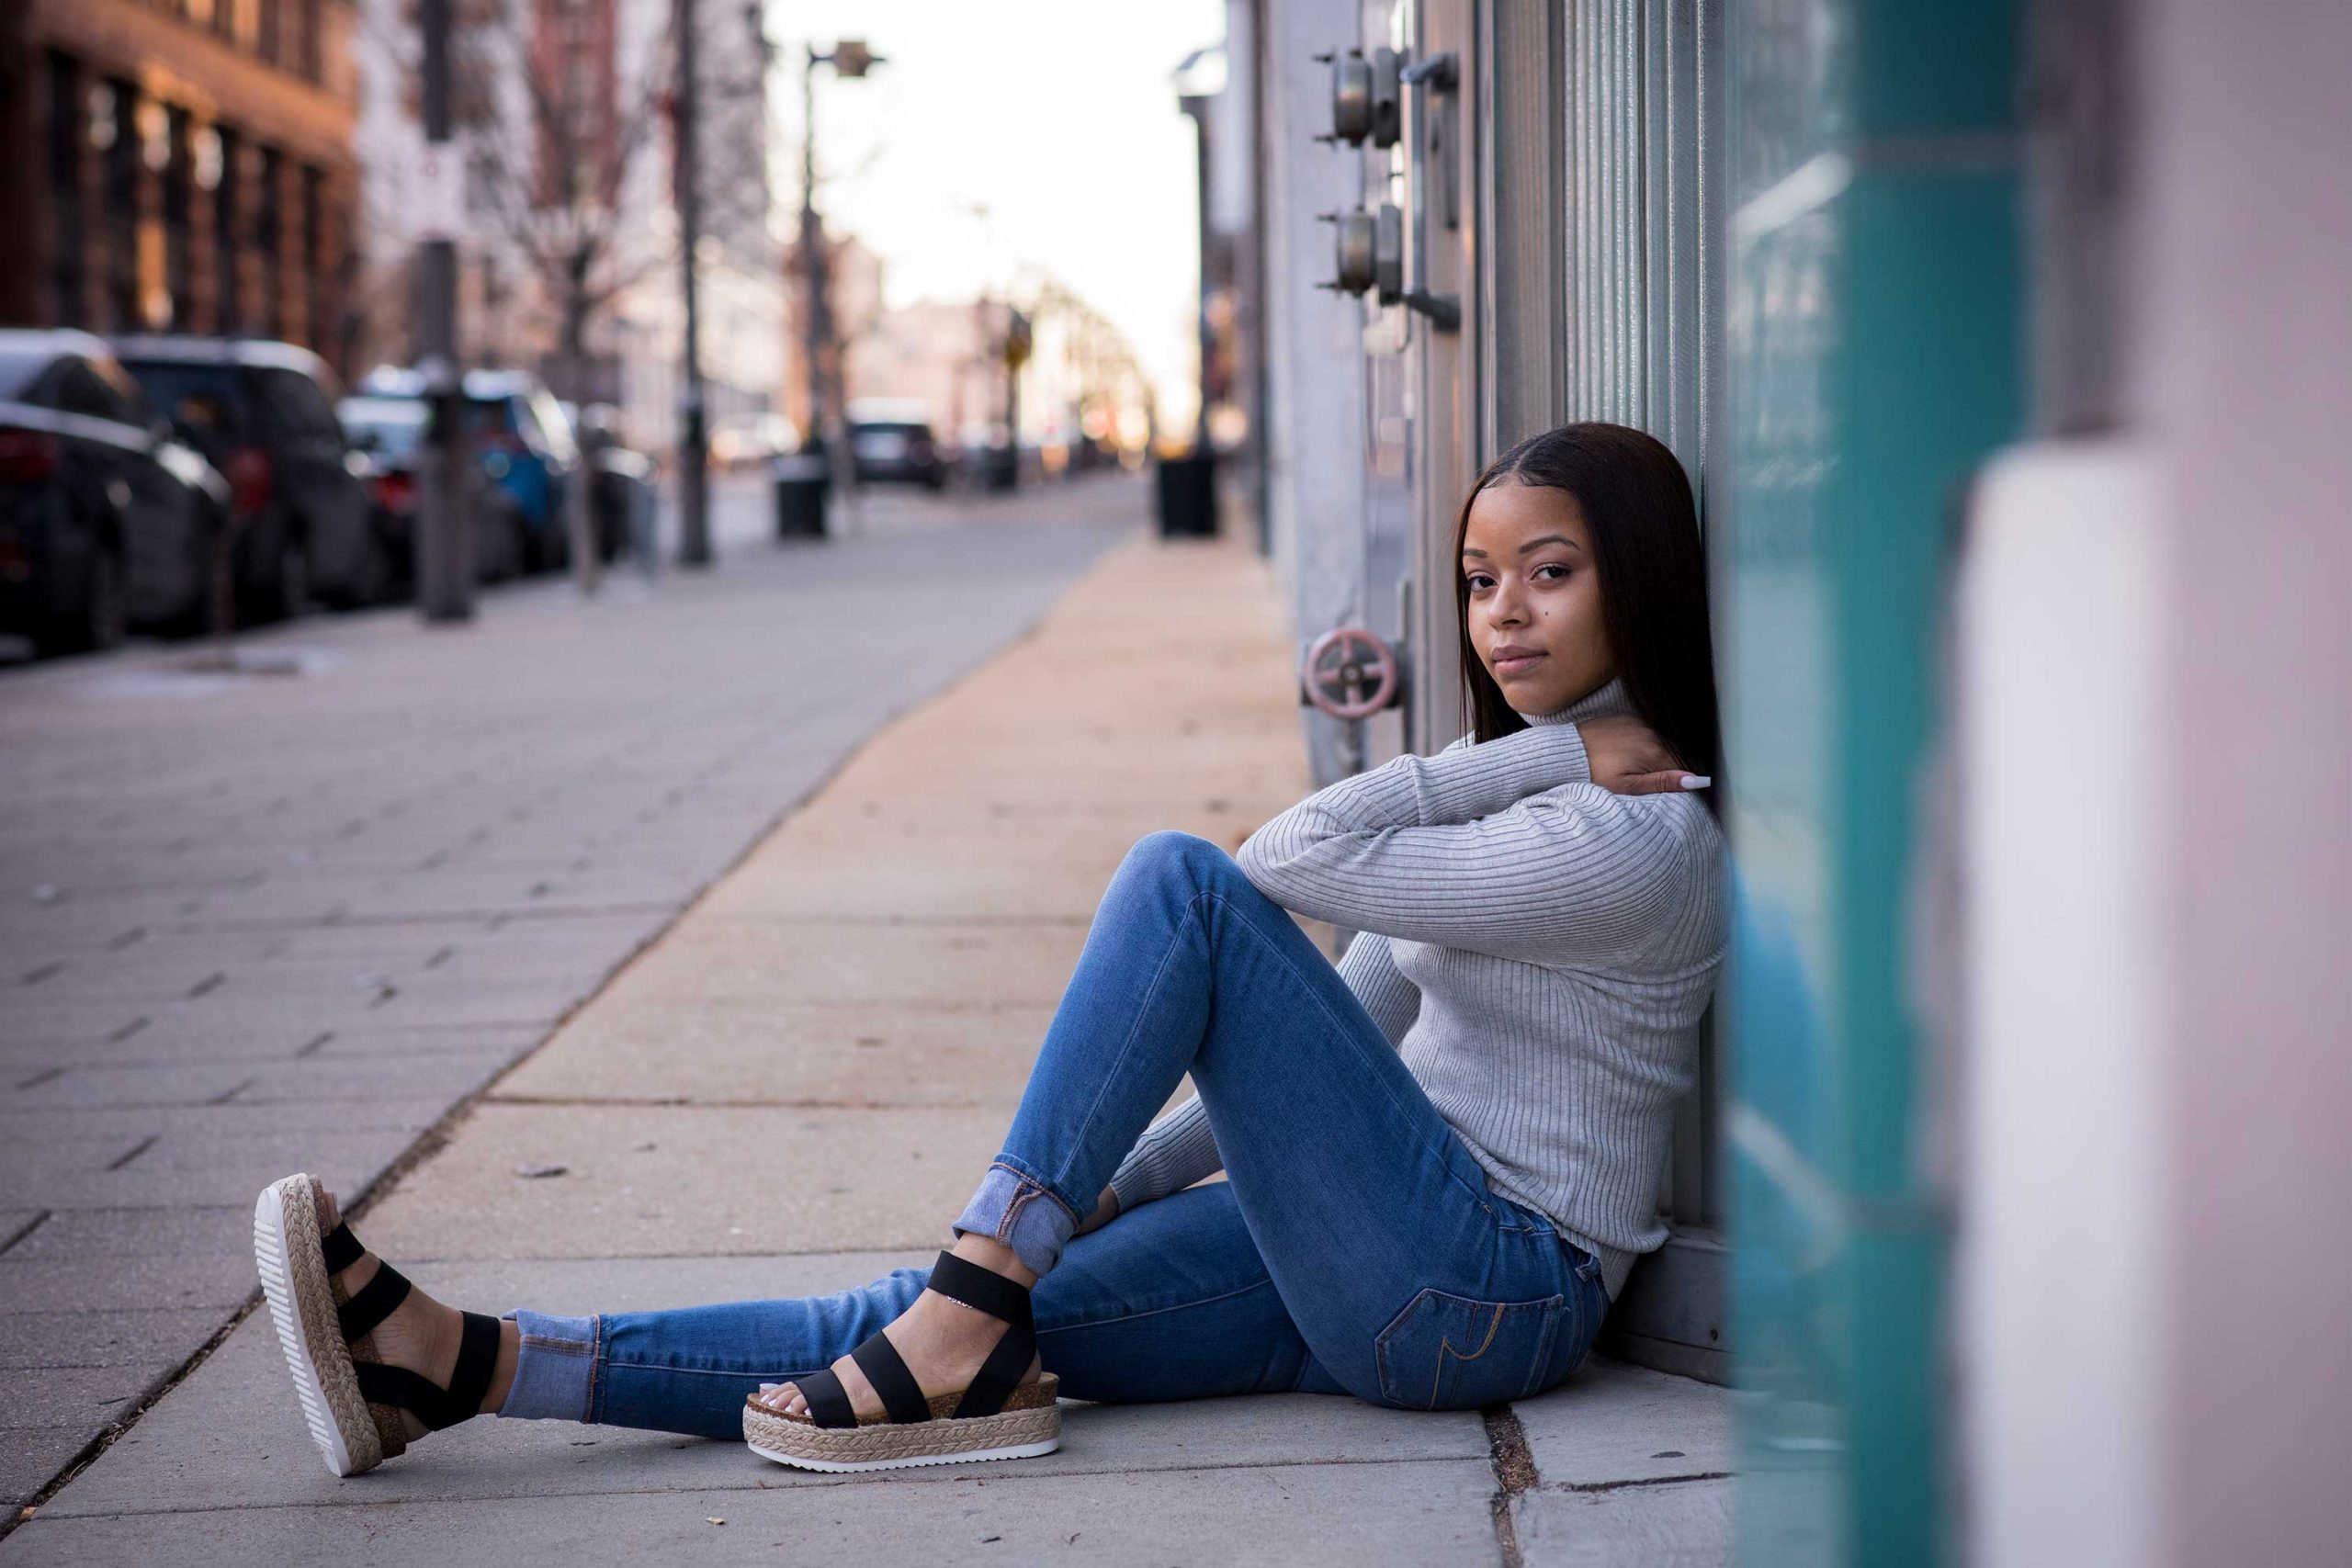 Girl in jeans and sandals in an urban setting sitting against turquoise and silver building.